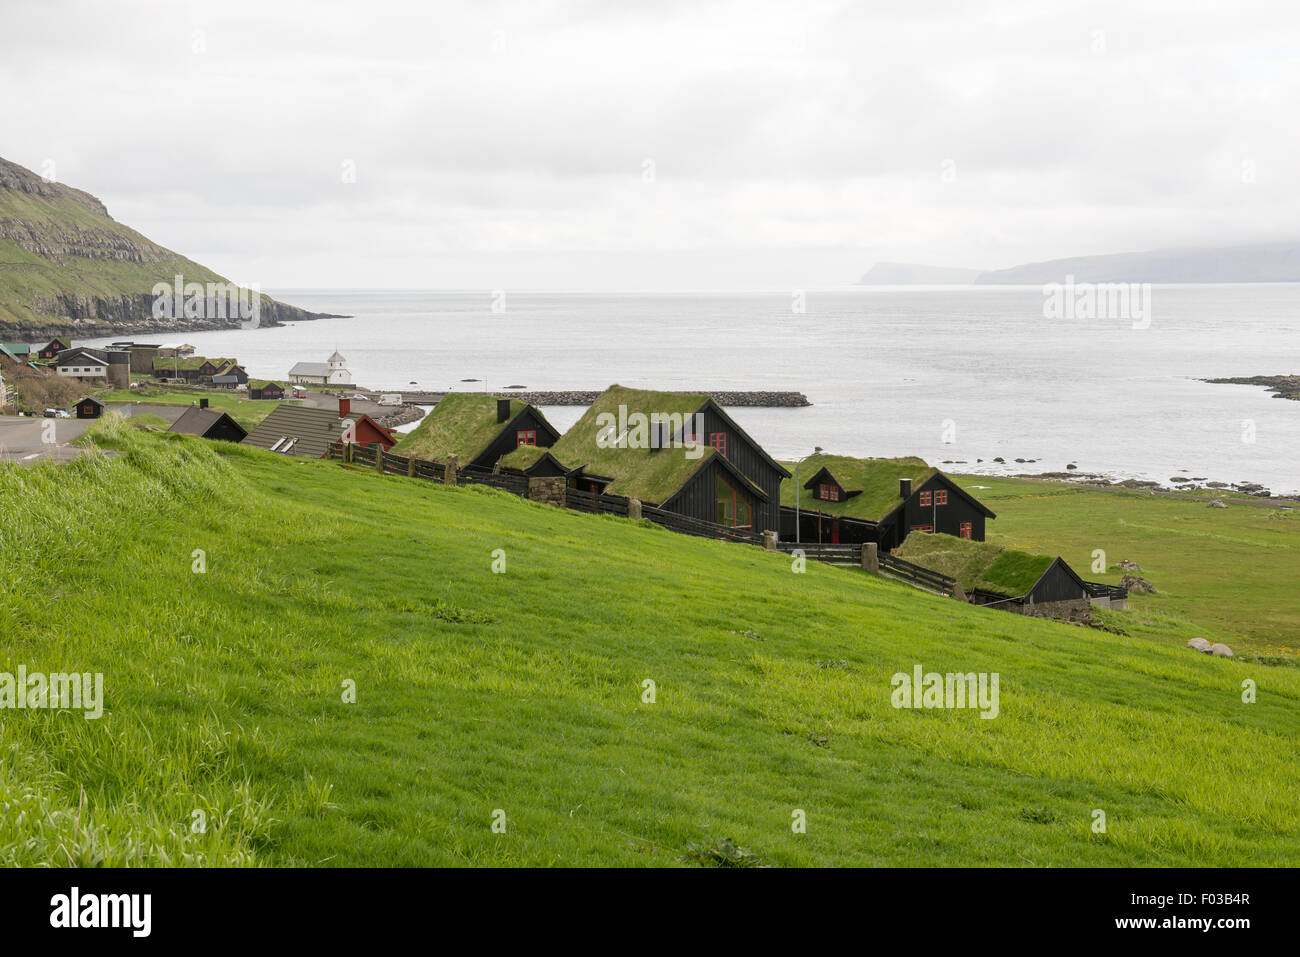 Kirkjubøur on the Faroe Islands with typical houses, church and road Stock Photo